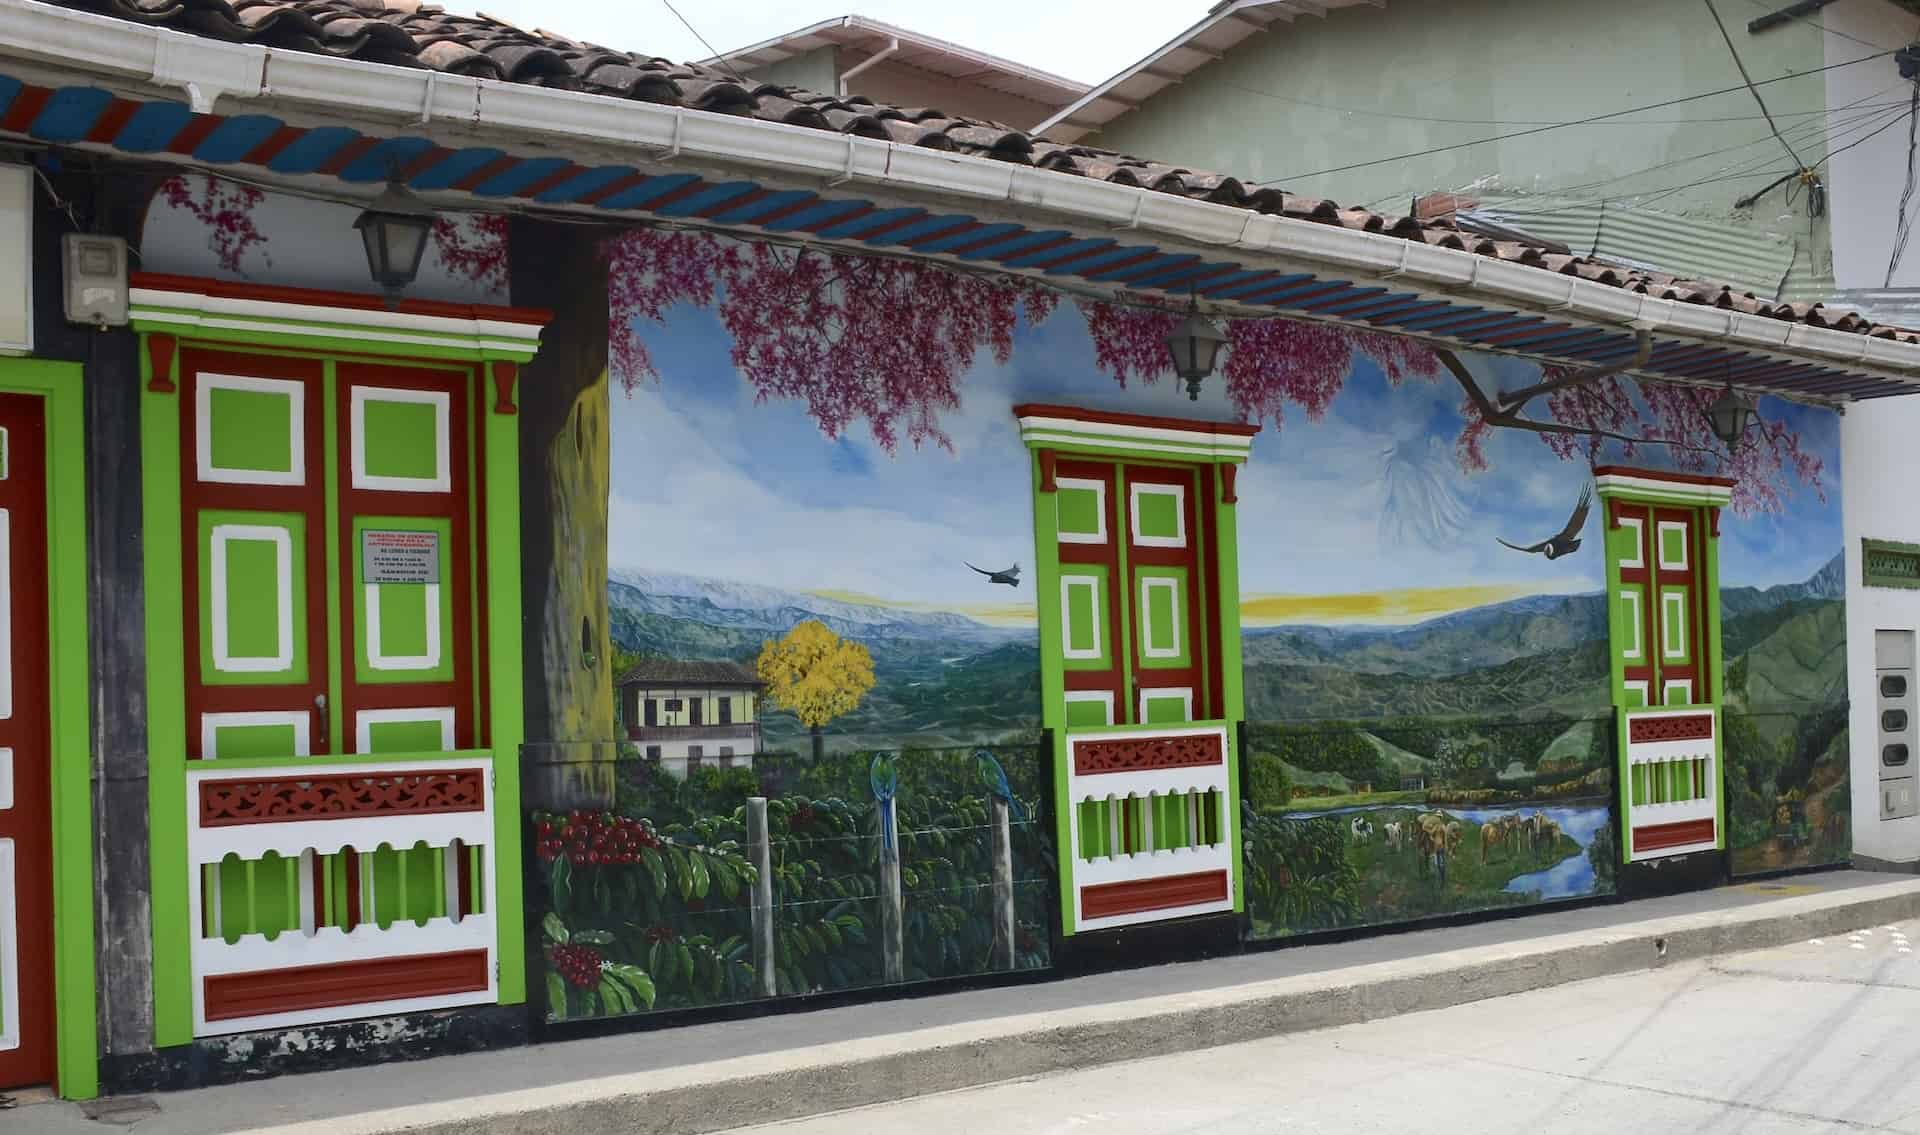 Mural at Carrera 3 and Calle 7 in Aguadas, Caldas, Colombia